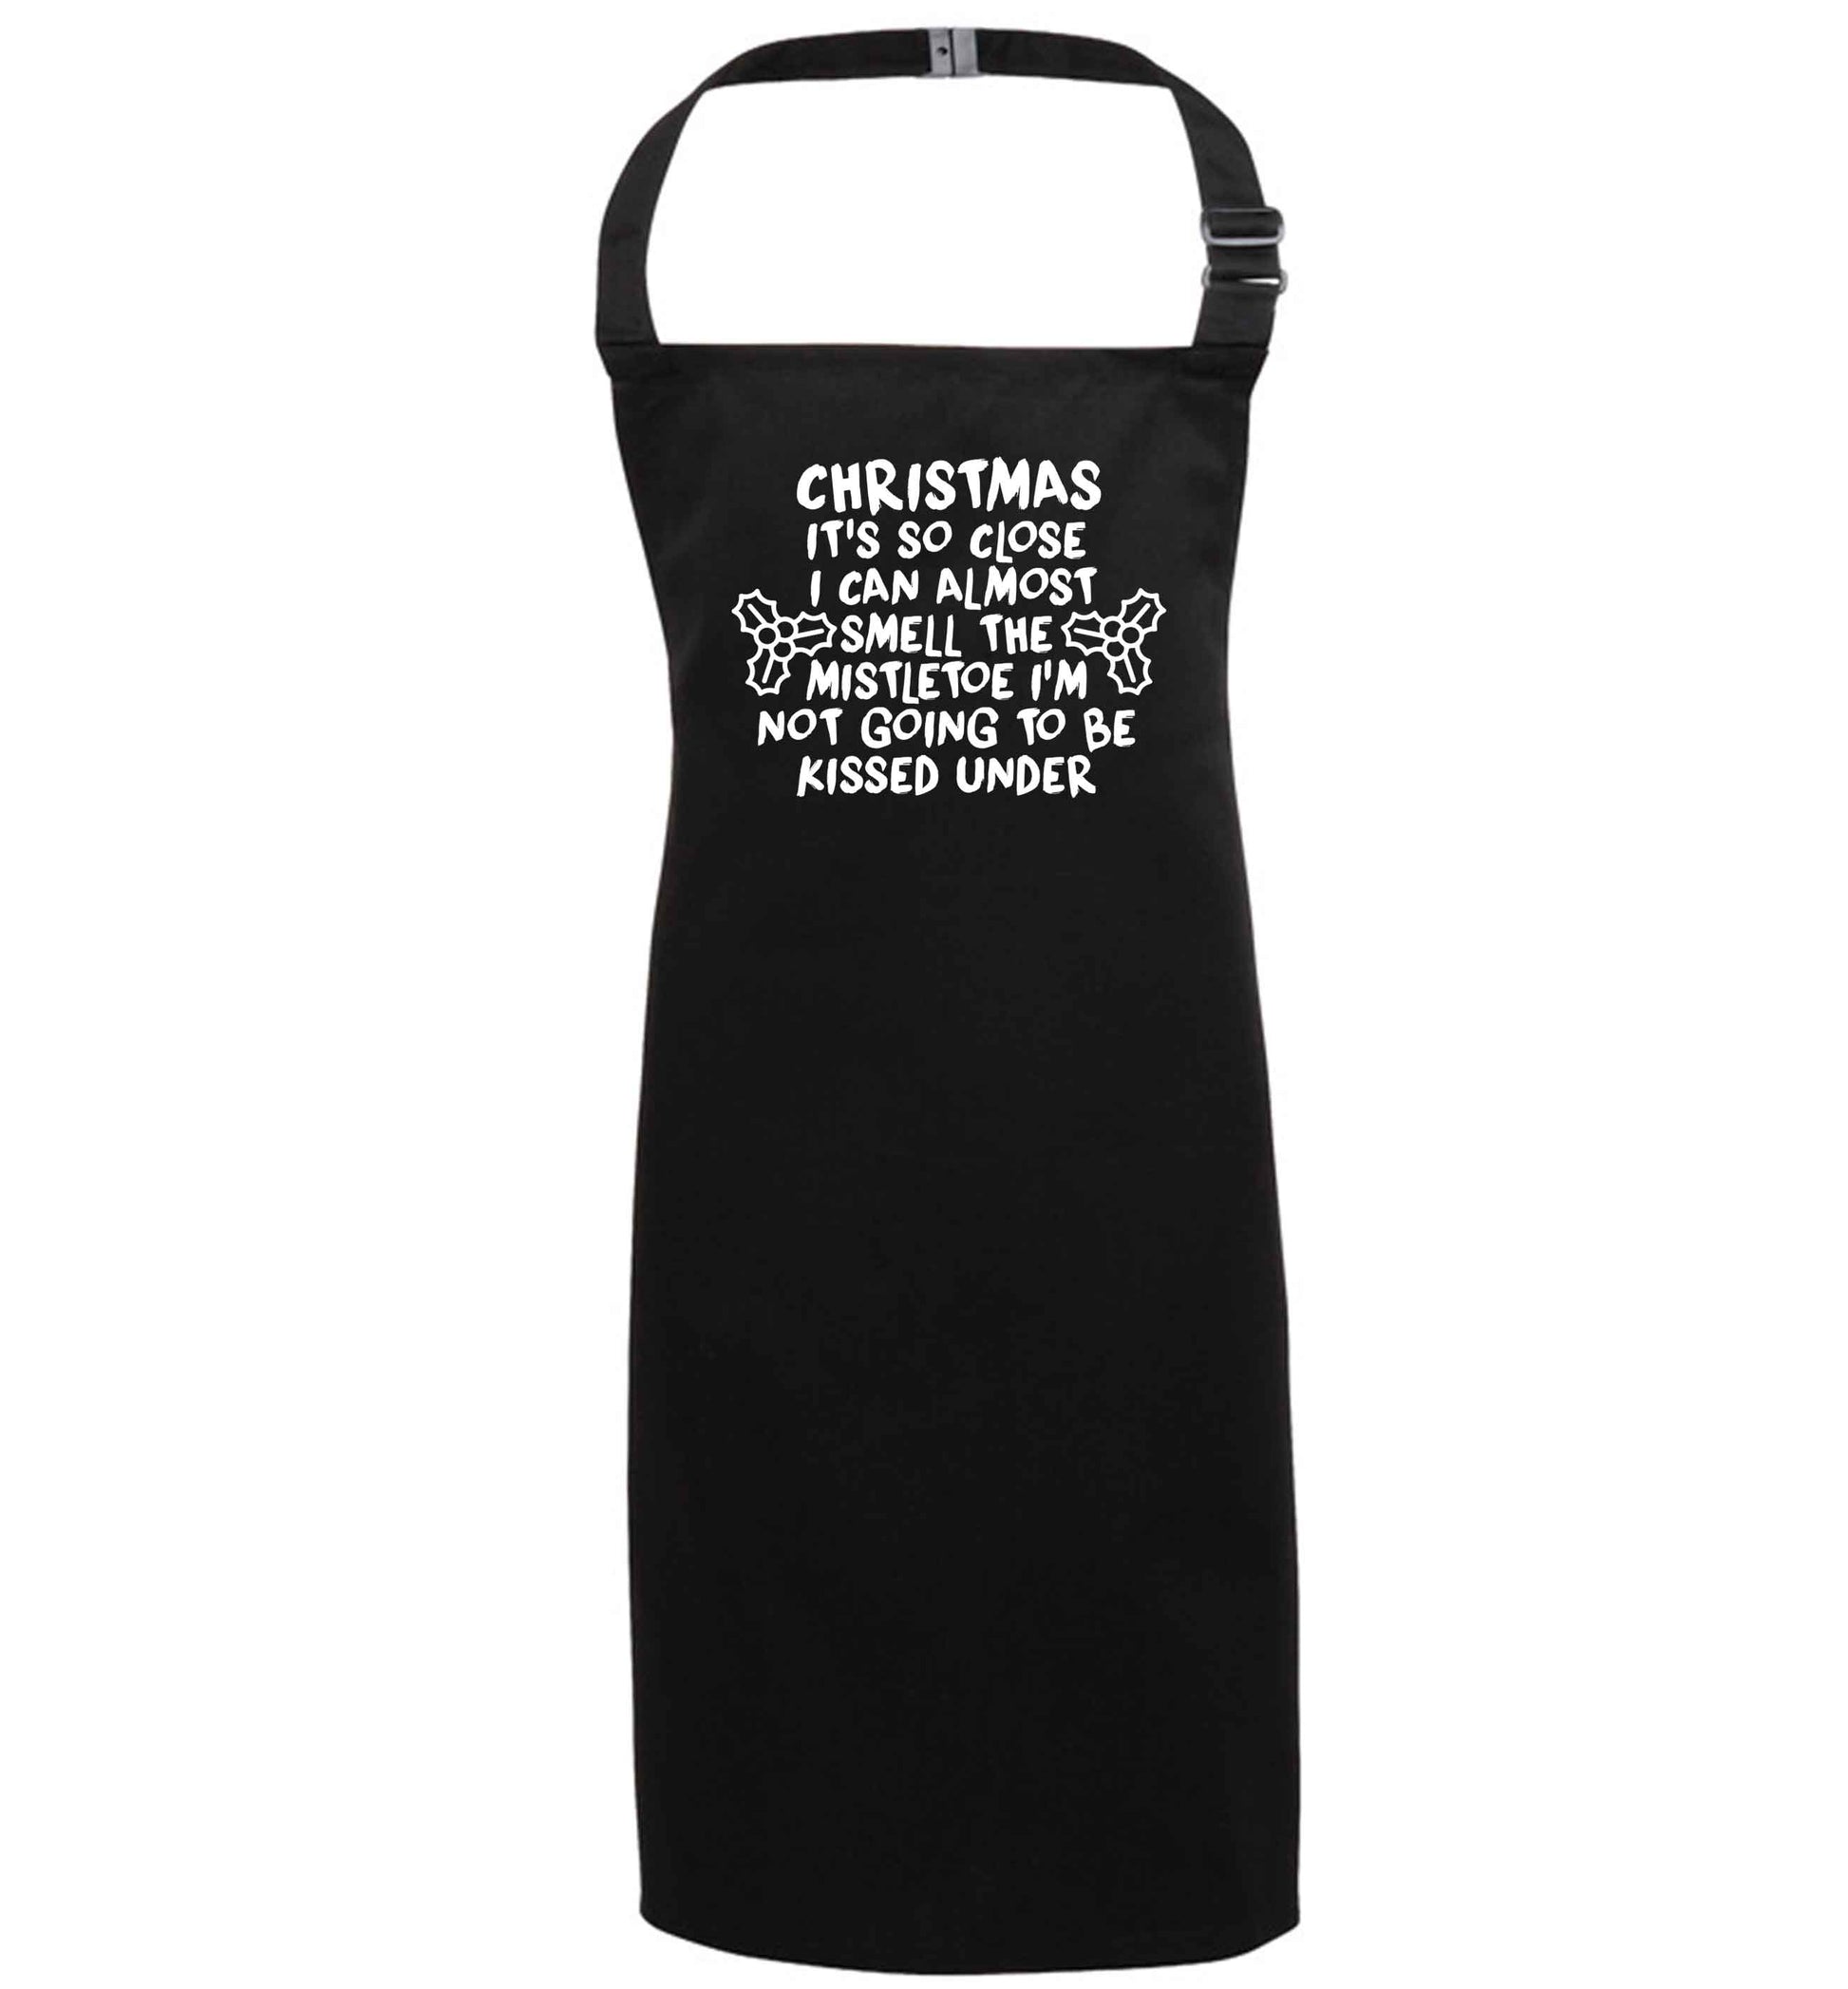 Christmas it's so close I can almost smell the misteltoe I'm not going to be kissed under black apron 7-10 years